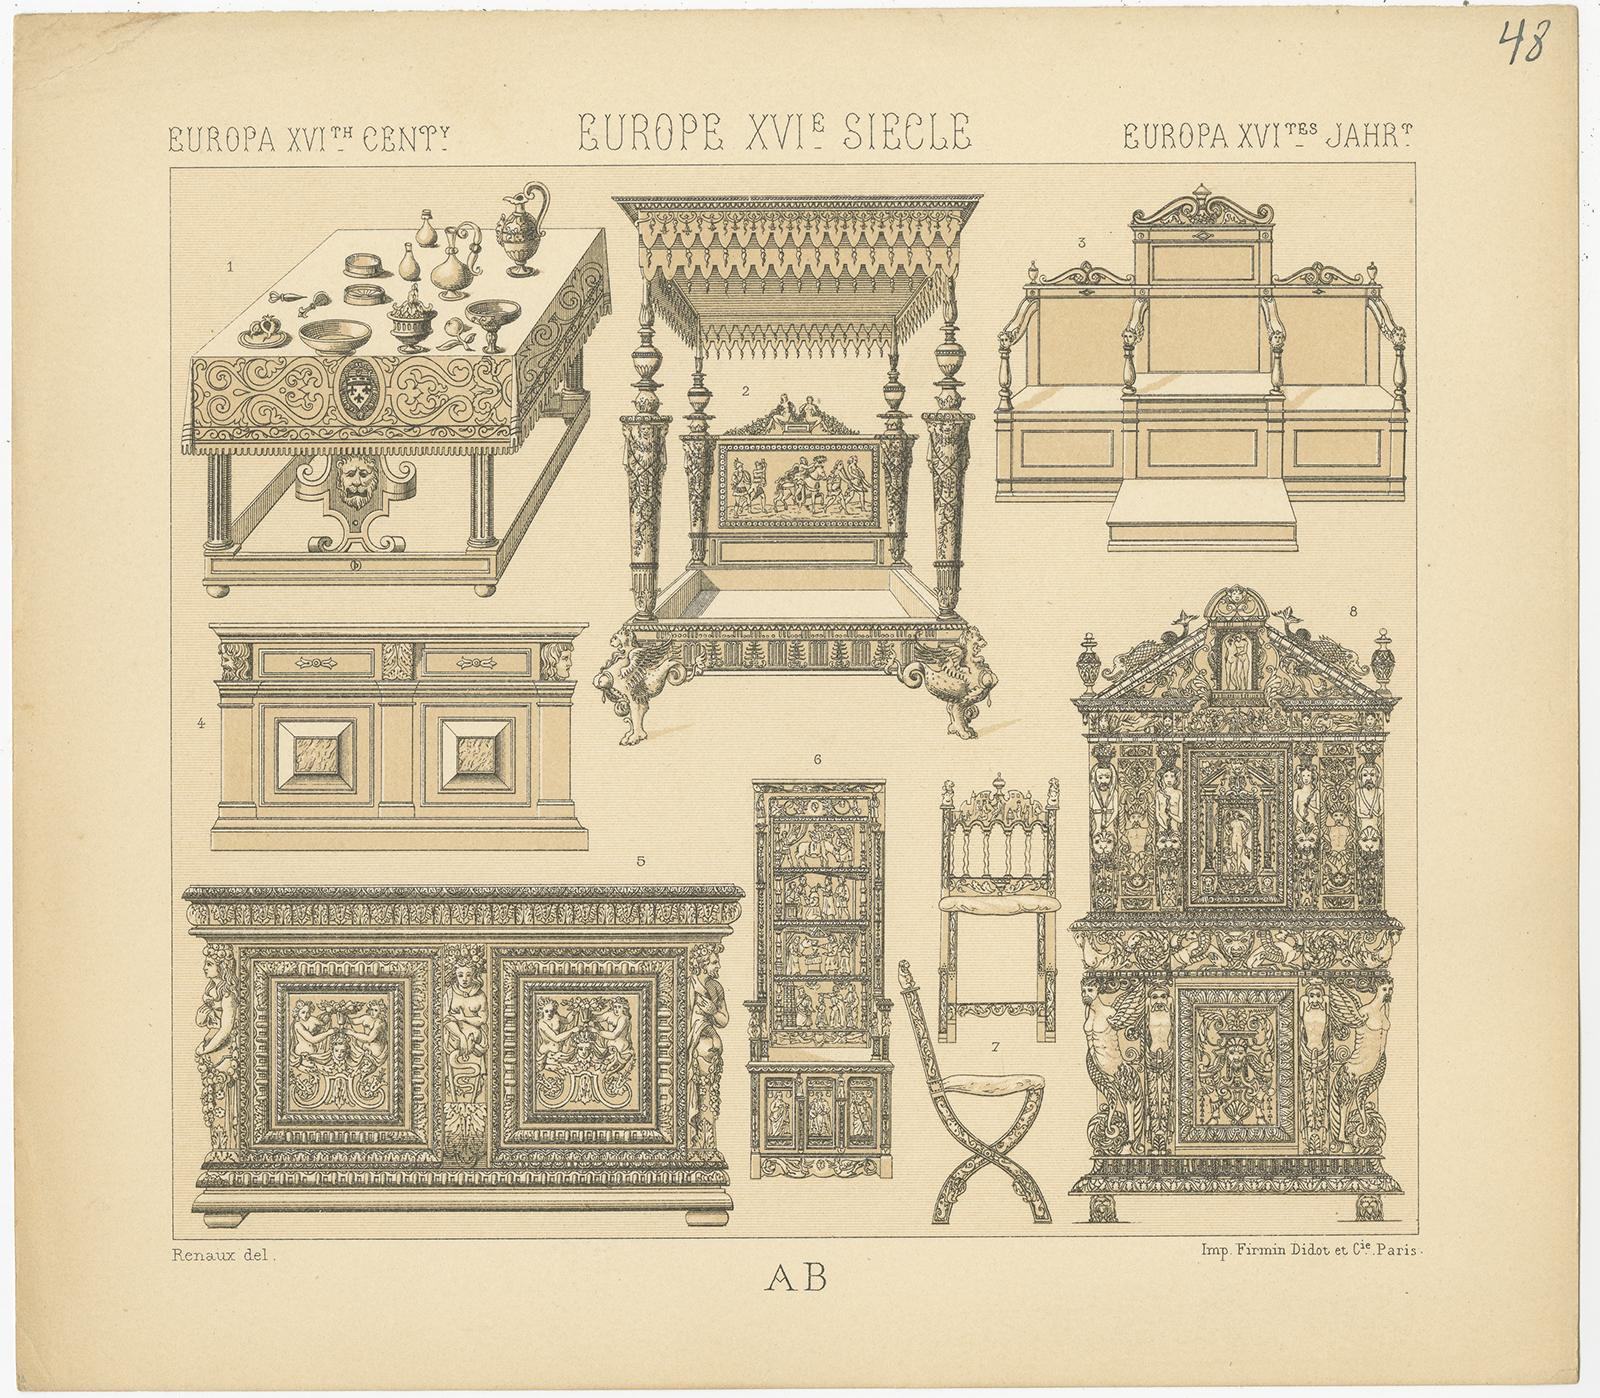 Antique print titled 'Europa XVIth Cent - EuropeXVIe, Siecle - Europa XVItes Jahr'. Chromolithograph of European XVIth Century Furniture. This print originates from 'Le Costume Historique' by M.A. Racinet. Published, circa 1880.